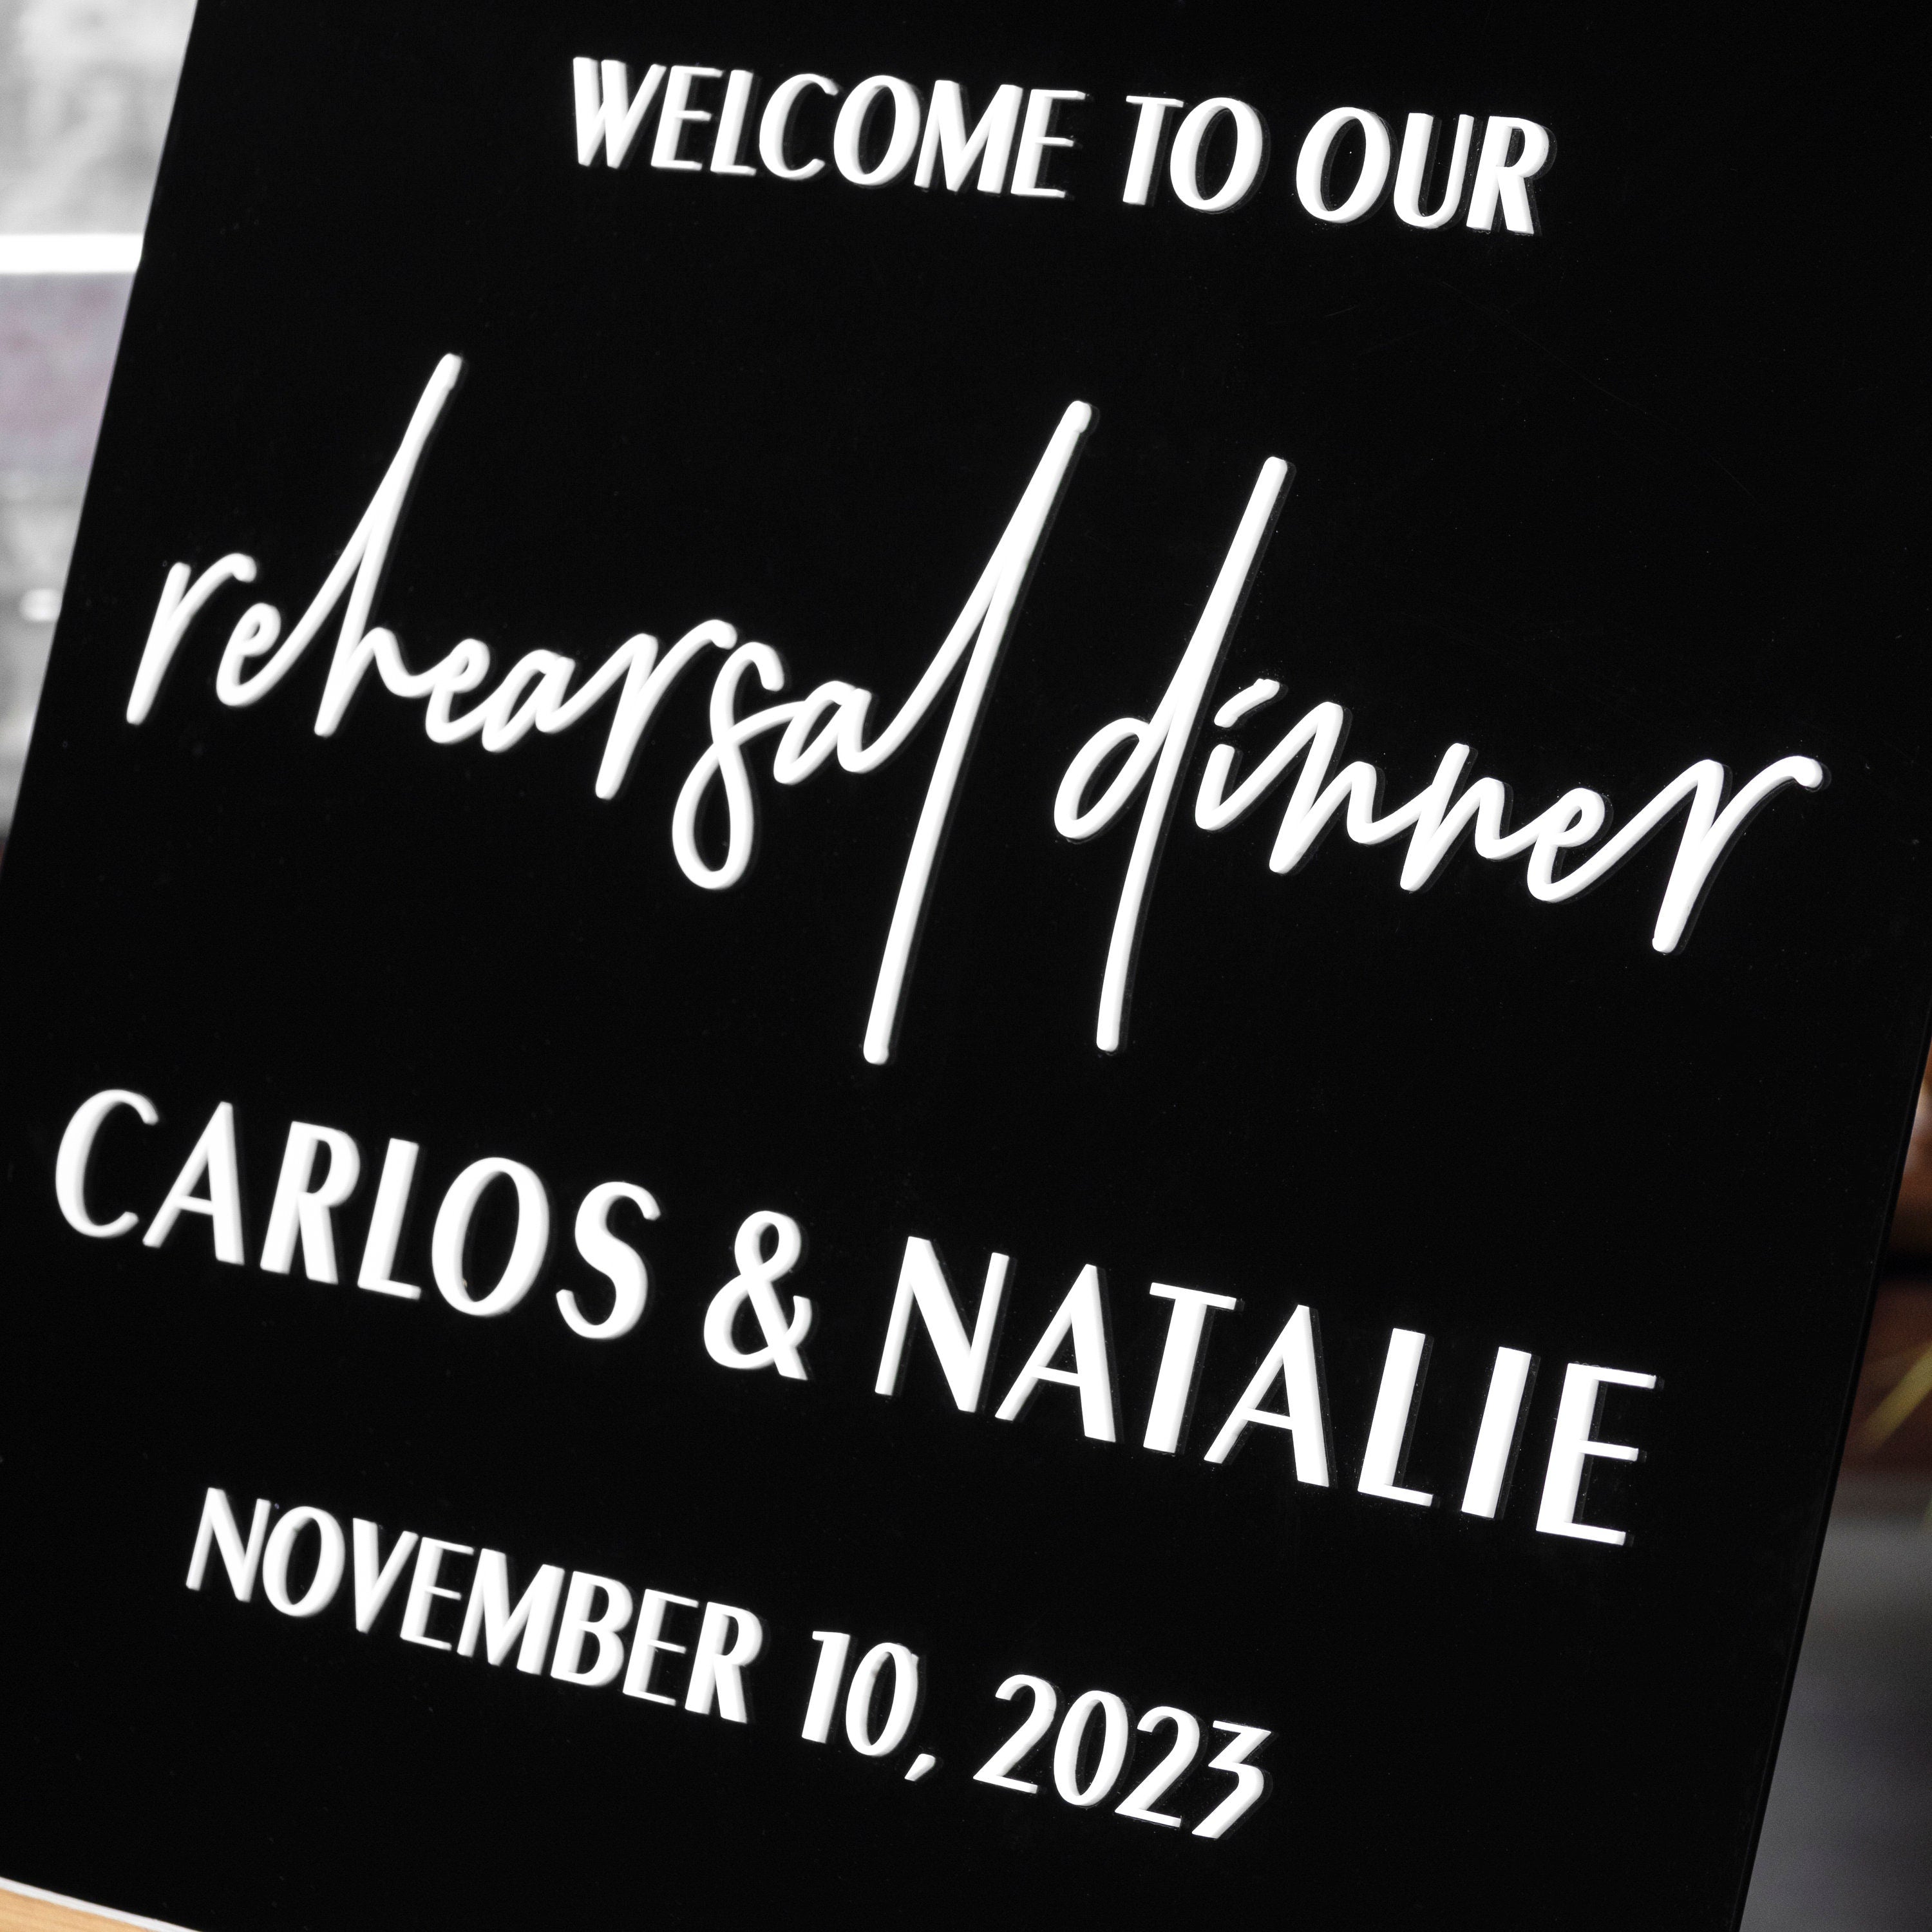 Acrylic Rehearsal Dinner Welcome Sign, Black Acrylic Sign, Black Acrylic Wedding Welcome Sign, Shiny Black Acrylic, the night before